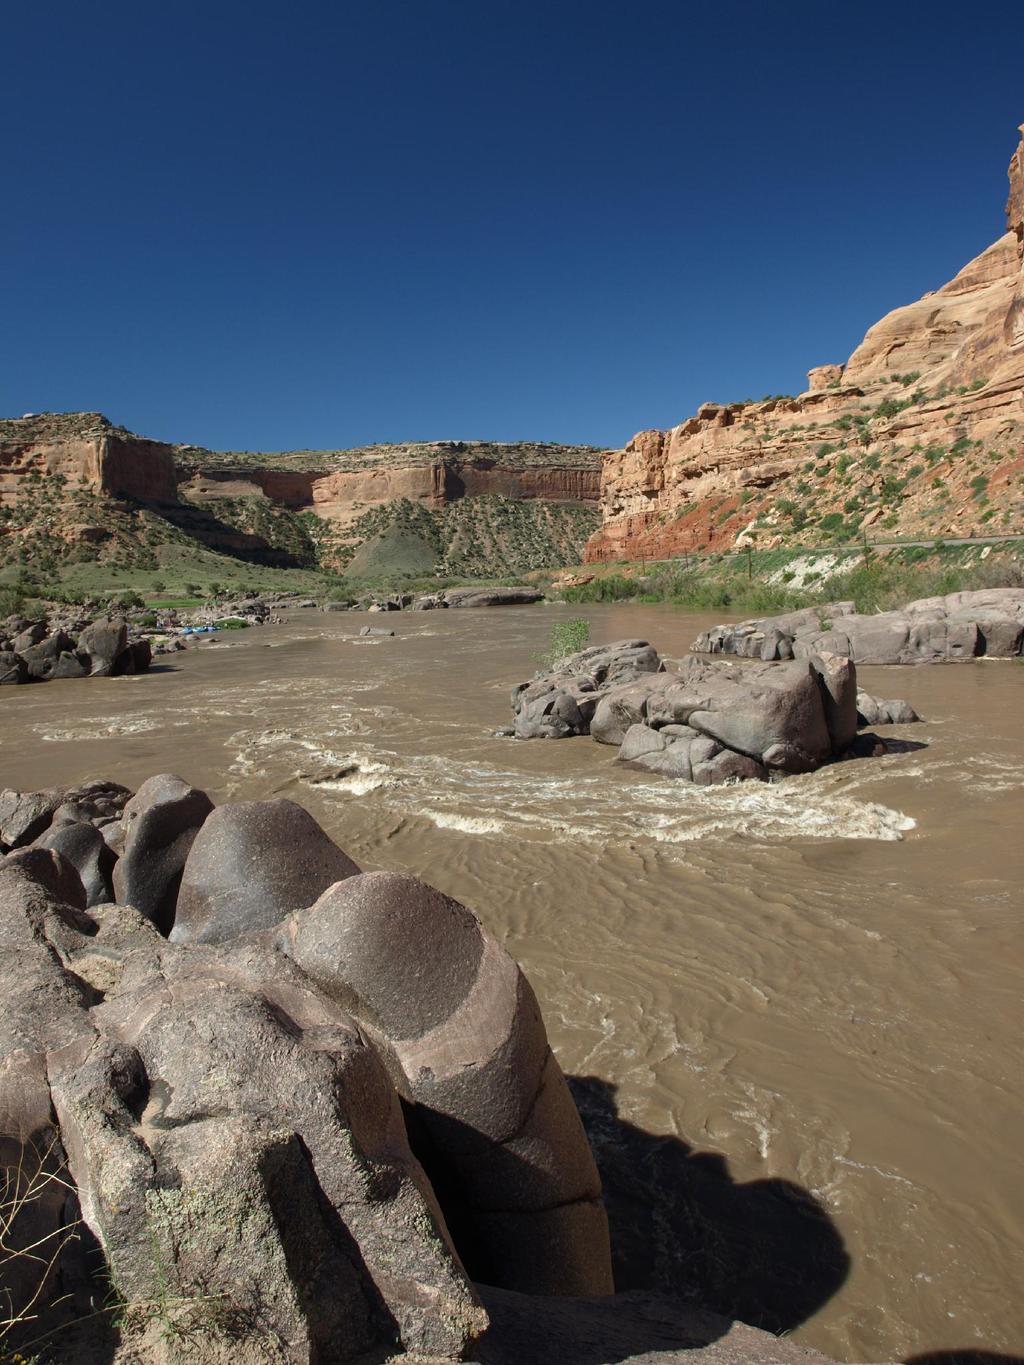 RUBY AND HORSETHIEF CANYONS - COLORADO RIVER Rating: Class II CFS Range: 1,000-30,000 Length: 1-3 days Gear: Standard paddling gear, bug spray in the summer.